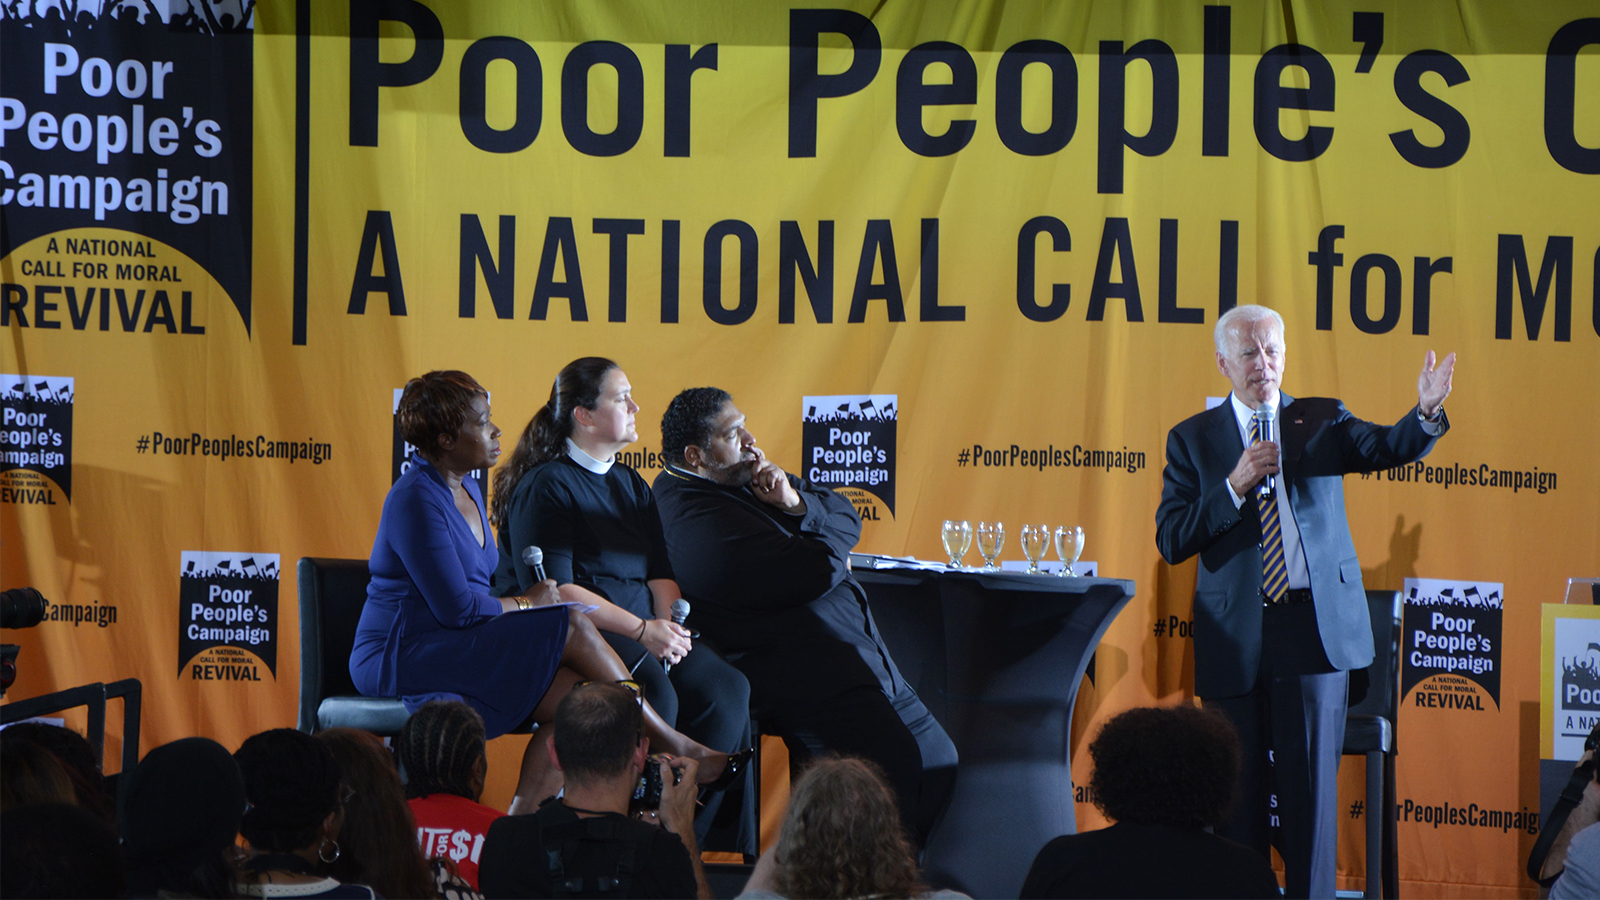 Presidential candidate Joe Biden, right, addresses a Poor People’s Campaign meeting at Trinity Washington University in Washington, D.C., on June 17, 2019. RNS photo by Jack Jenkins